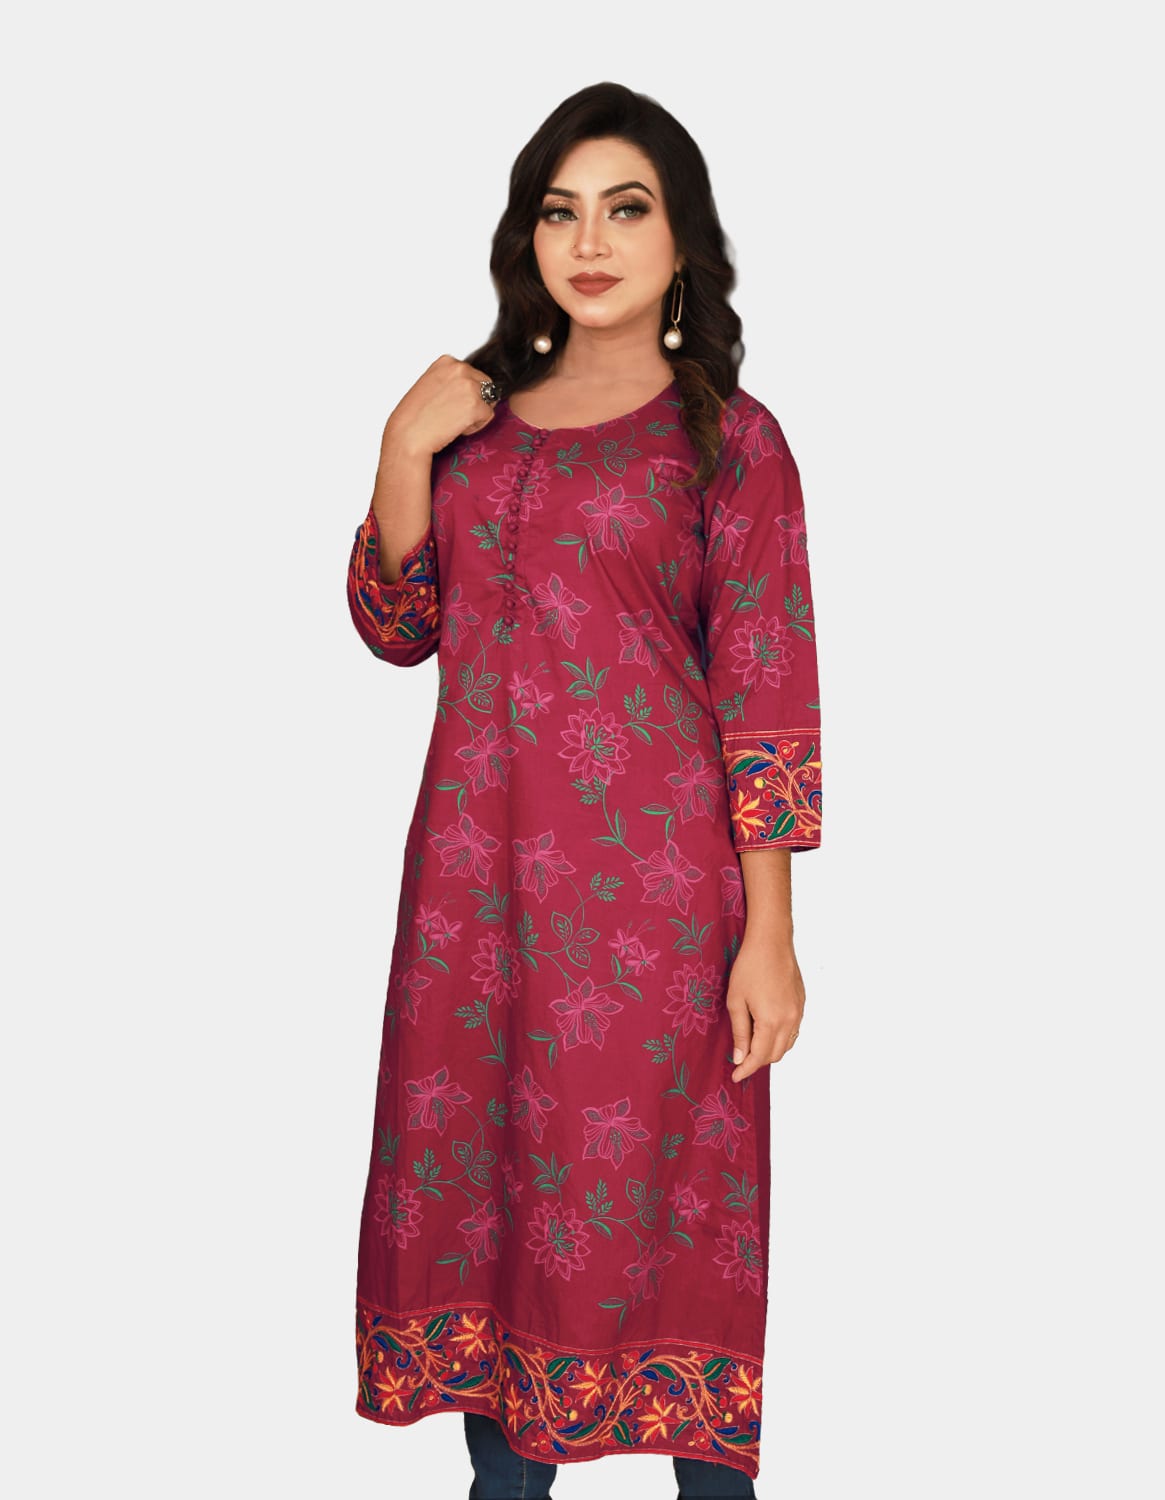 Women's Embroidered & Floral Printed Kurti